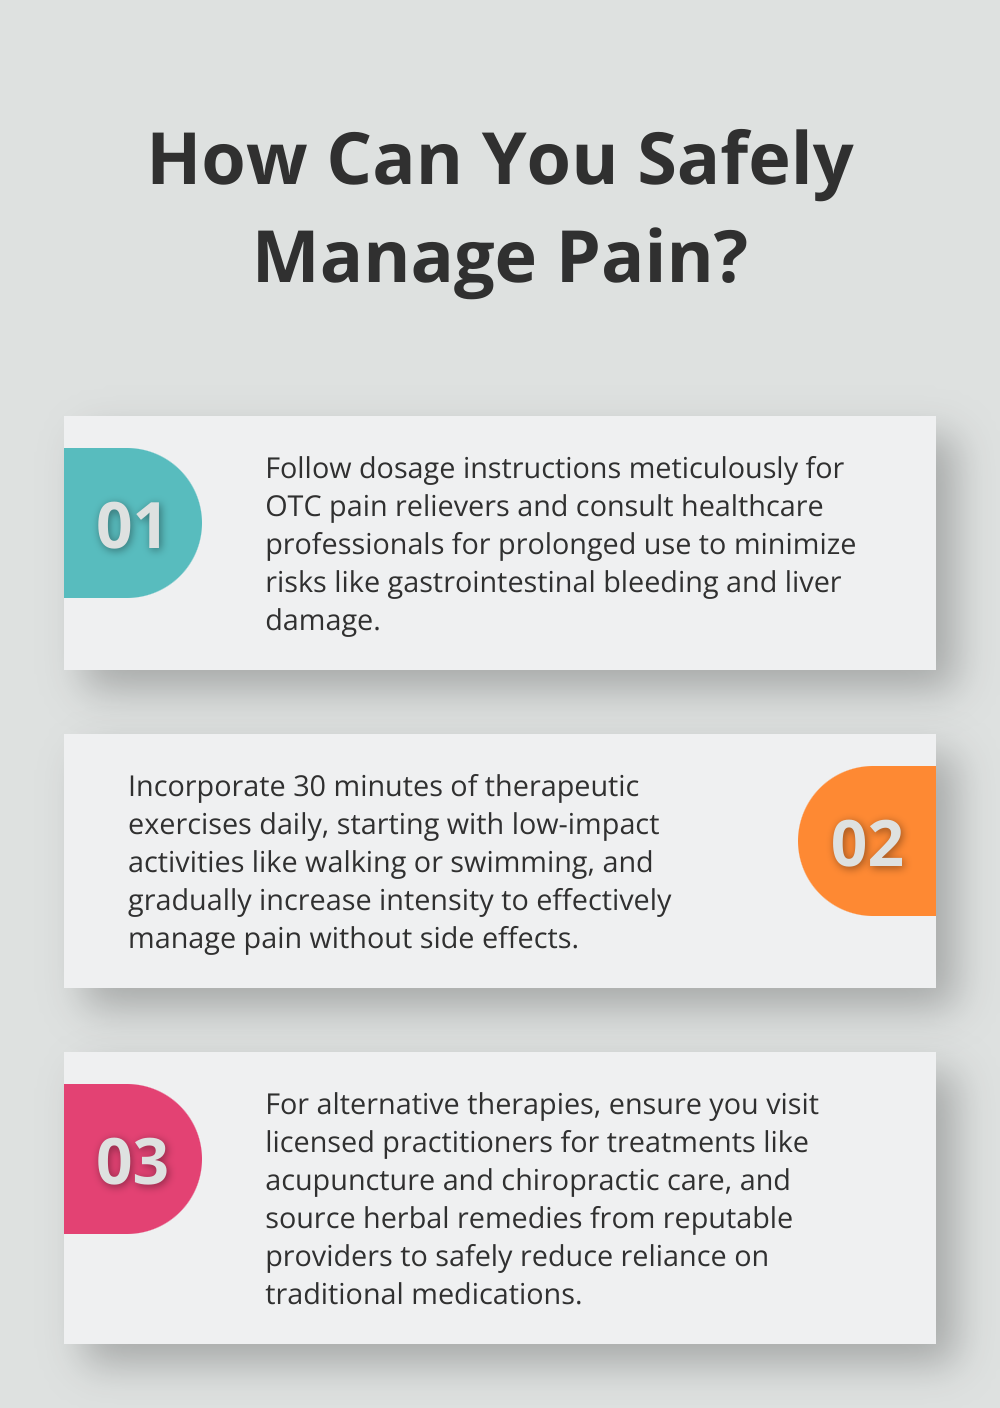 Fact - How Can You Safely Manage Pain?